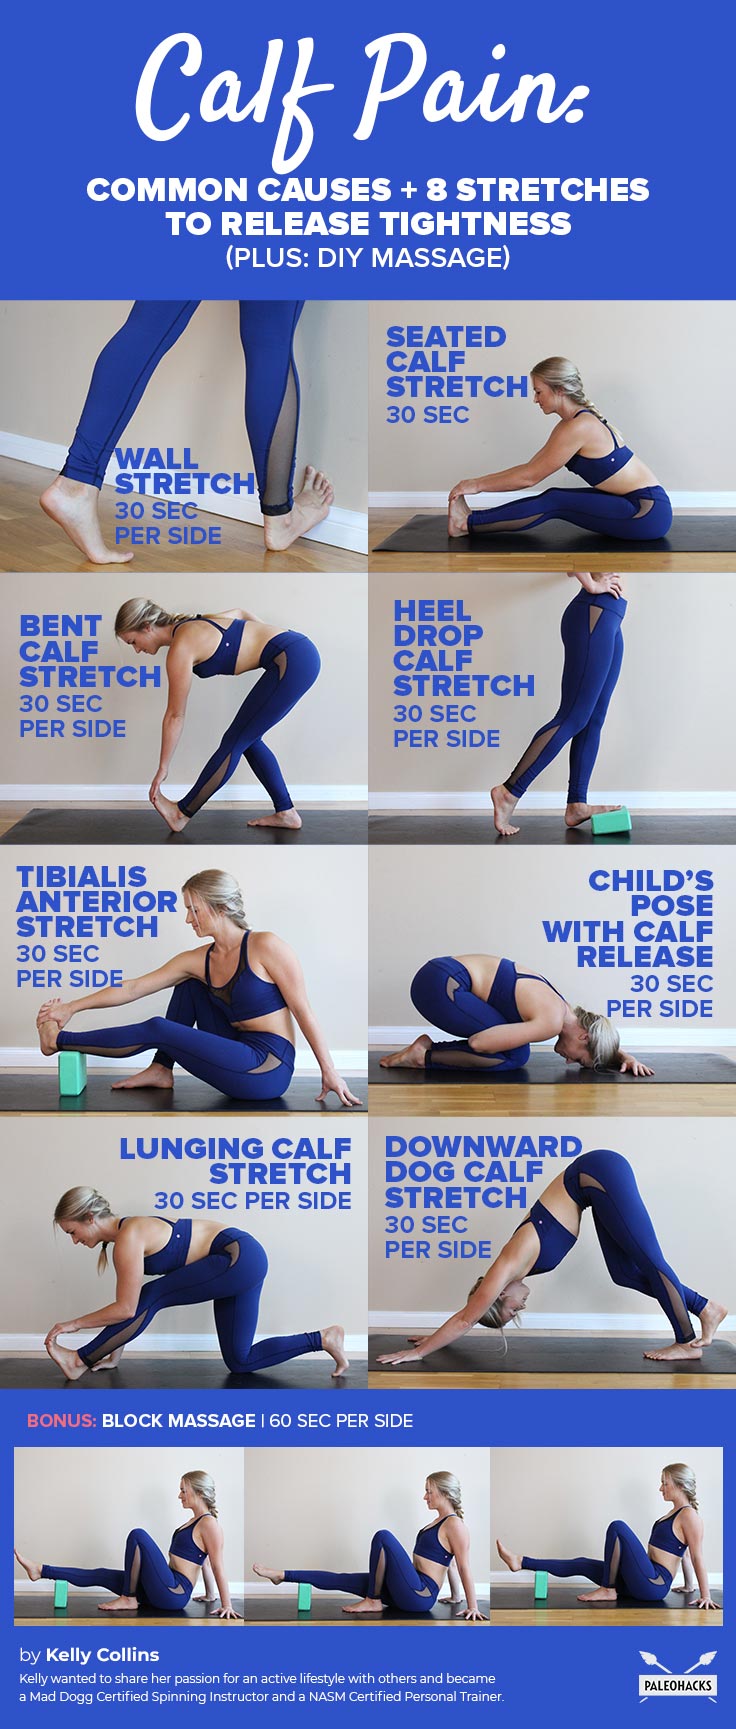 If you suffer from sore, painful calves, here are the best stretches to help you release built up tightness. Speed up your healing time with these tips.